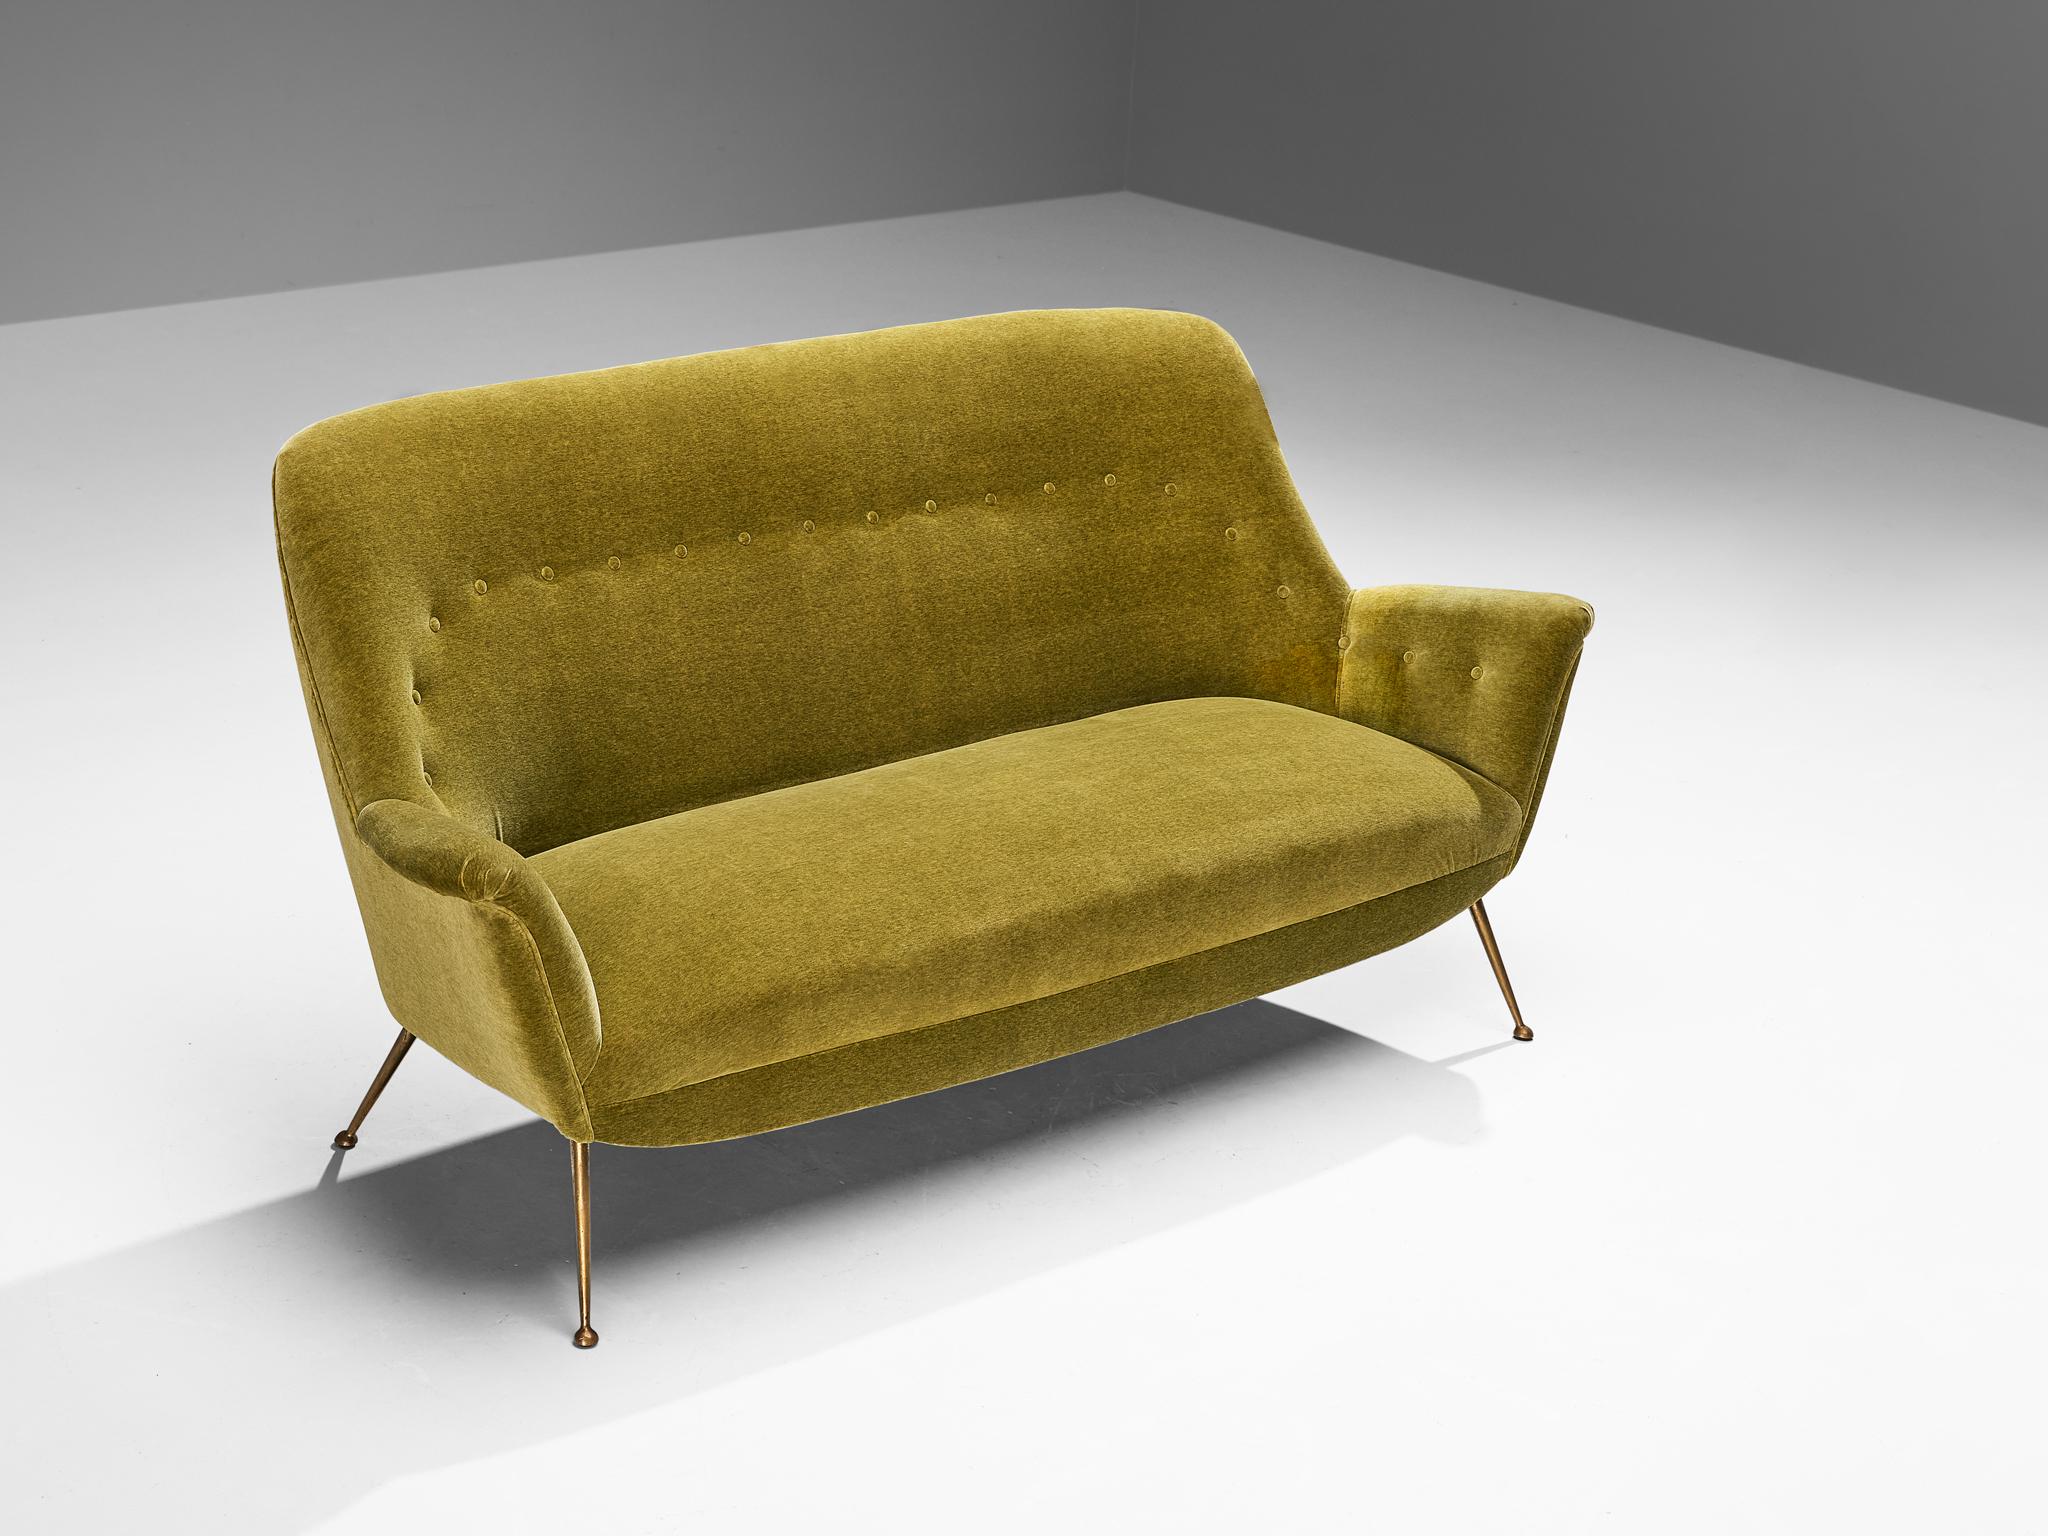 Sofa, velvet, brass, Italy, 1950s

This gorgeous sofa is an iconic example of Italian design from the 1950s. Organic and sculptural, this sofa is anything but minimalistic. Equipped with stiletto brass feet which are narrow conically tapered and,